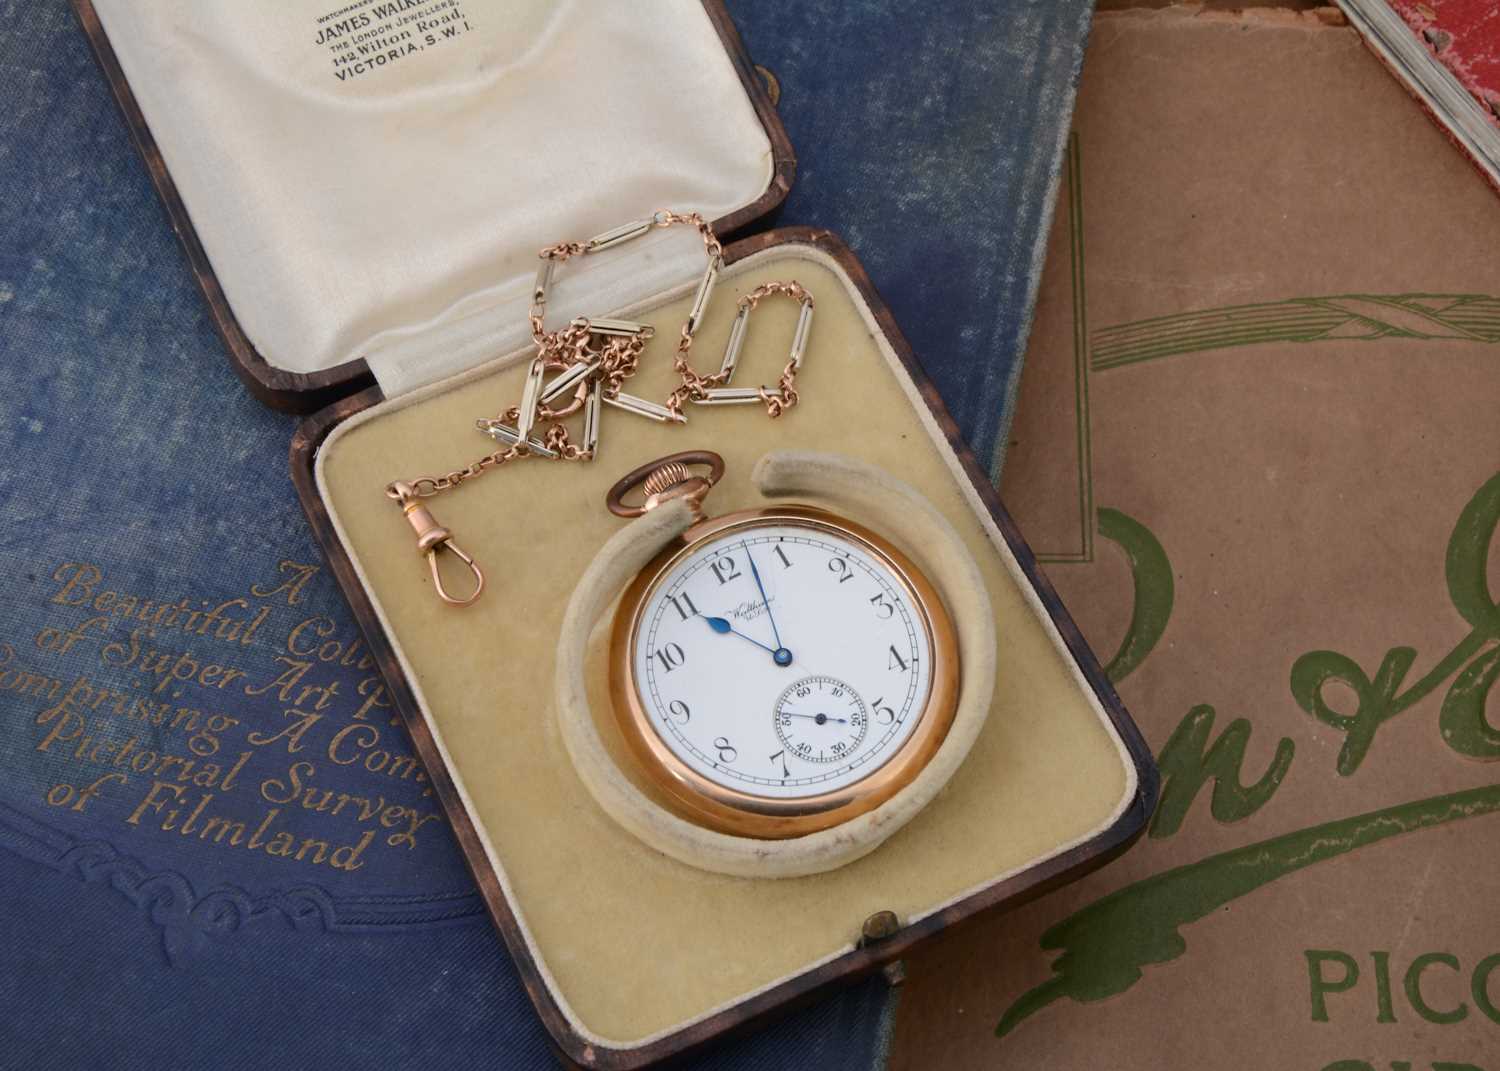 An early 20th century gold plated Waltham pocket watch with gold chain in box,